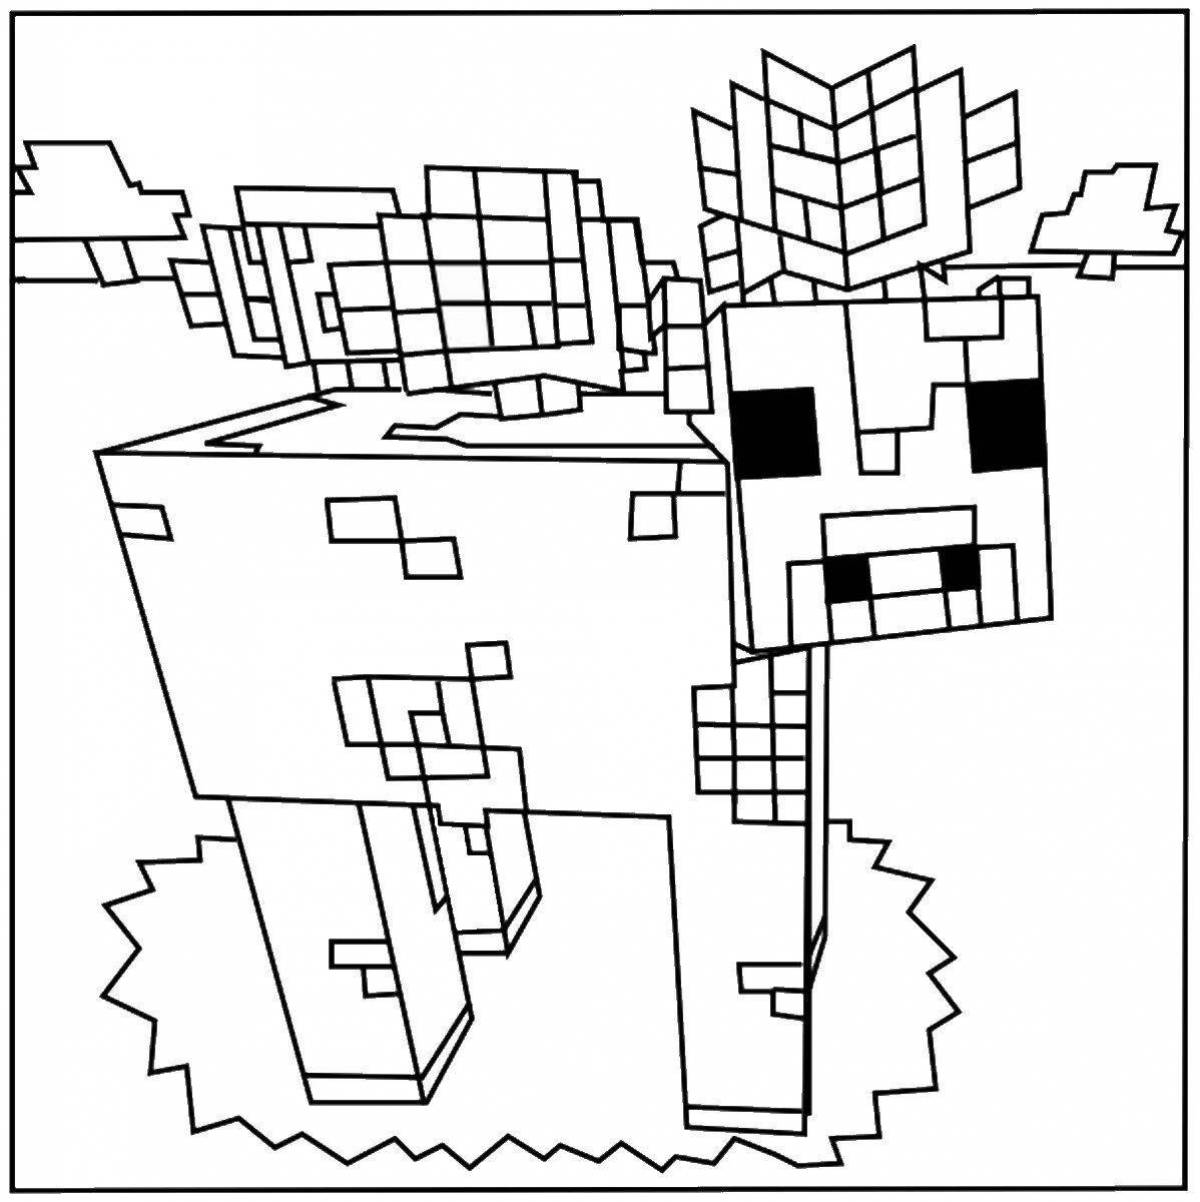 Jazzy minecraft dungeon coloring page